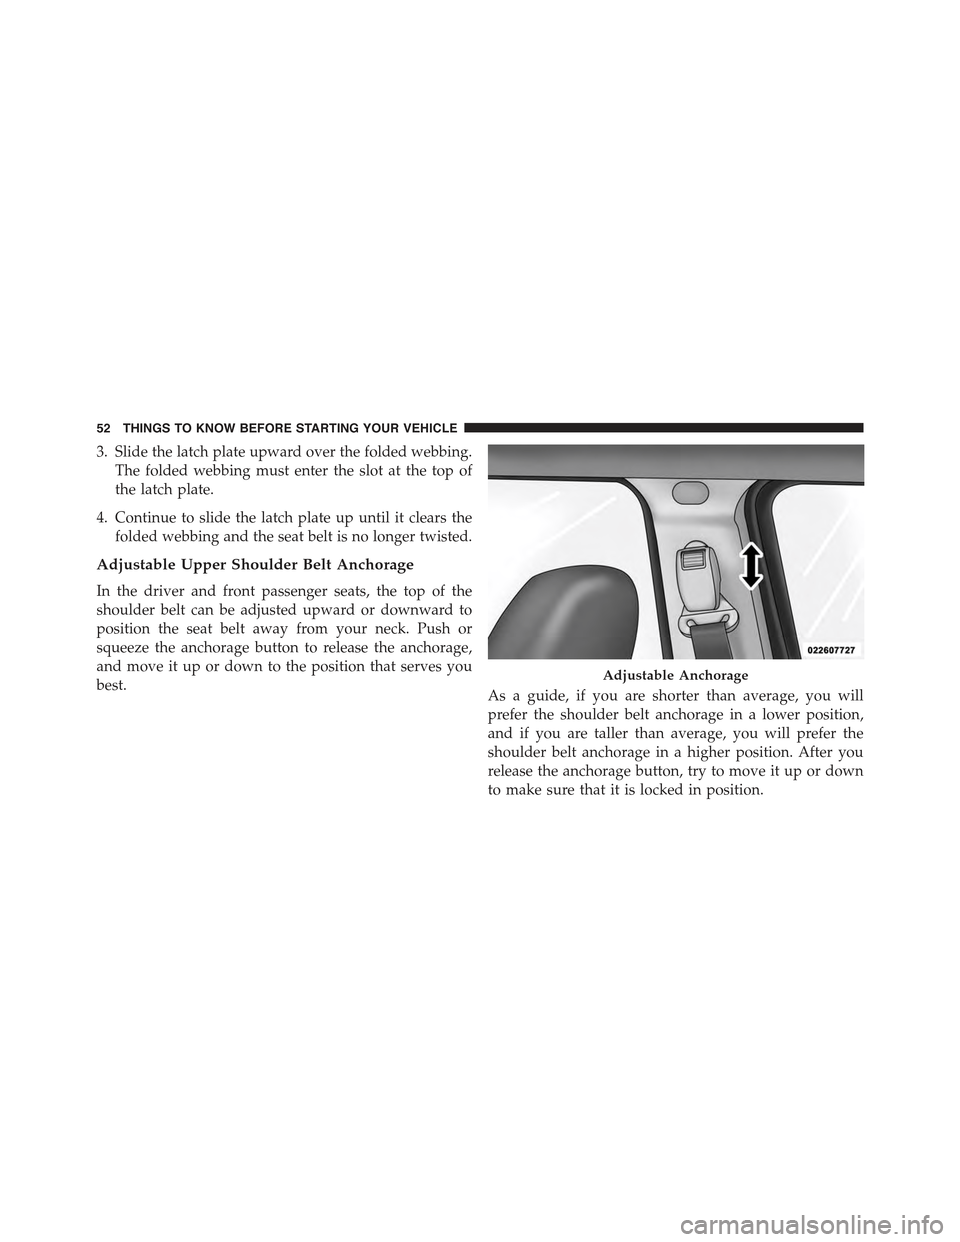 JEEP COMPASS 2015 1.G Owners Manual 3. Slide the latch plate upward over the folded webbing.
The folded webbing must enter the slot at the top of
the latch plate.
4. Continue to slide the latch plate up until it clears the
folded webbin